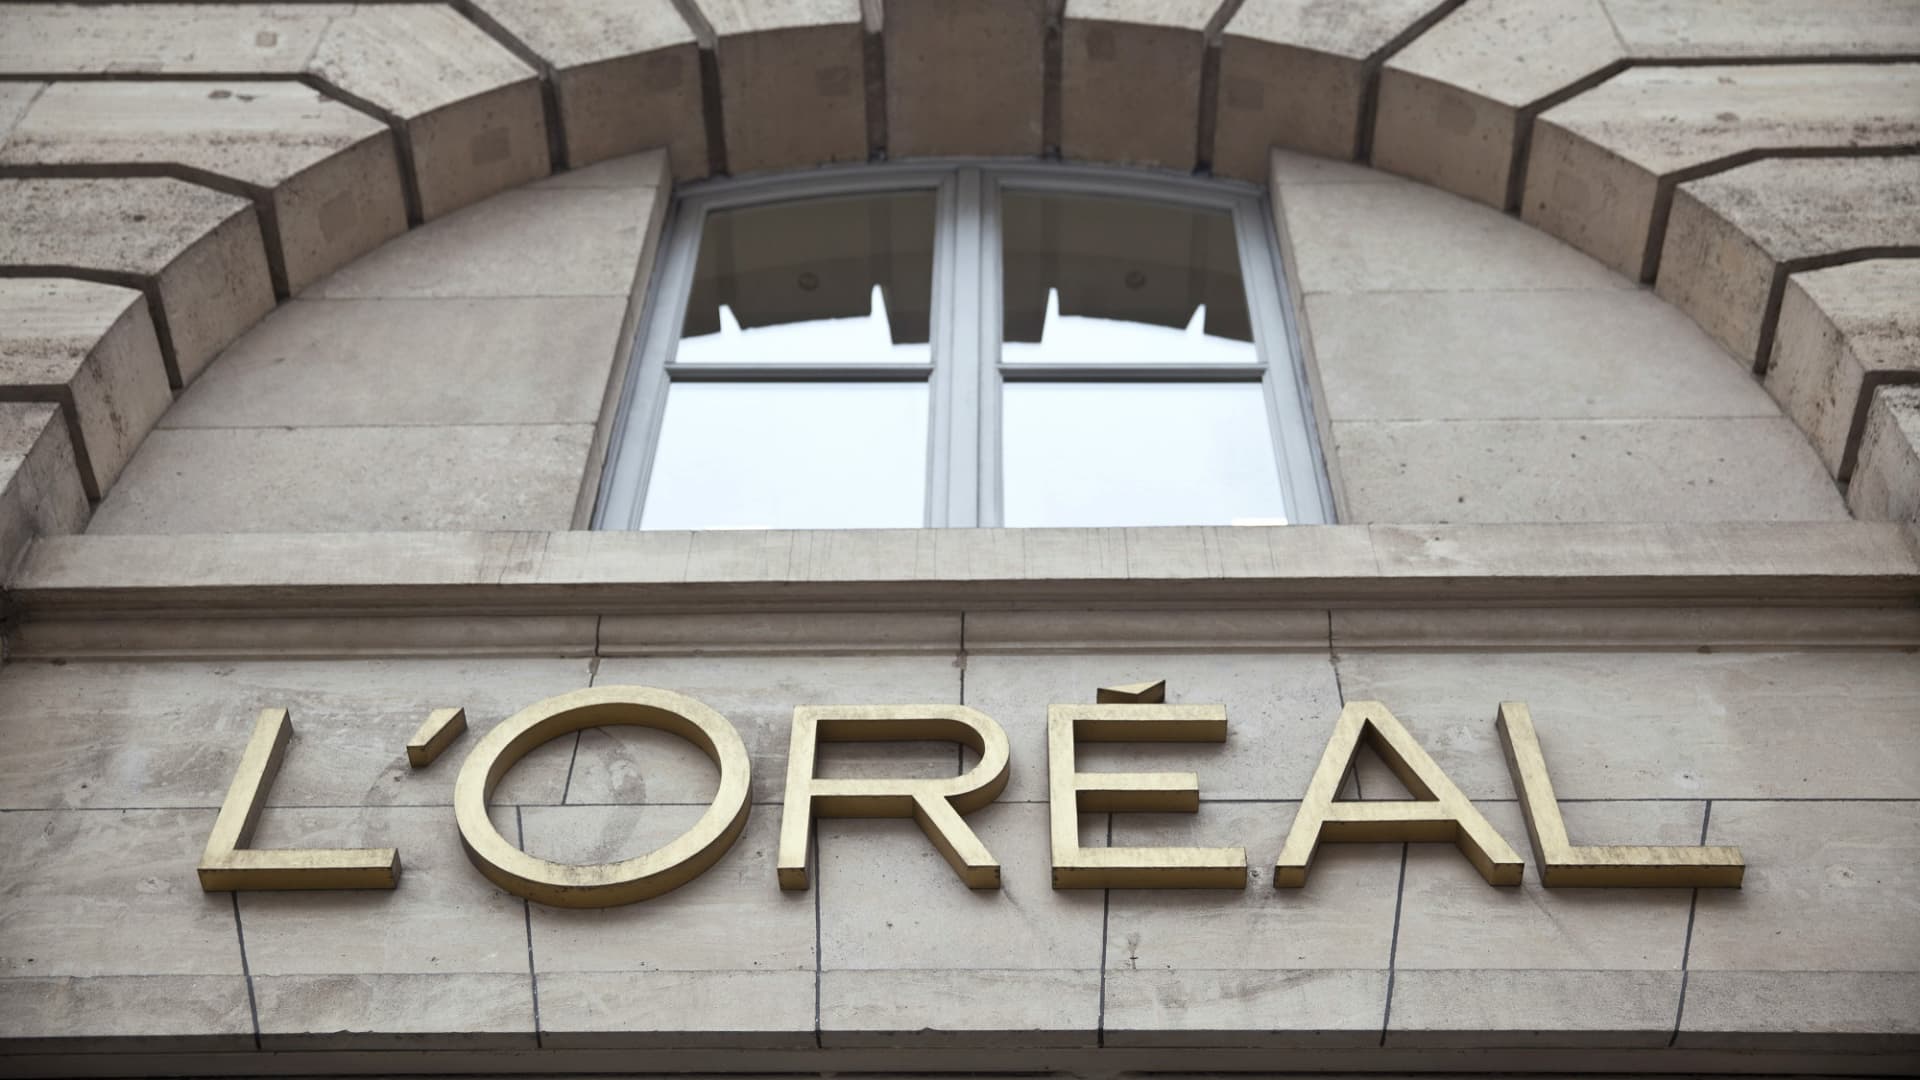 L'Oreal shares down 7% on lower-than-expected sales, slowdown in Asia